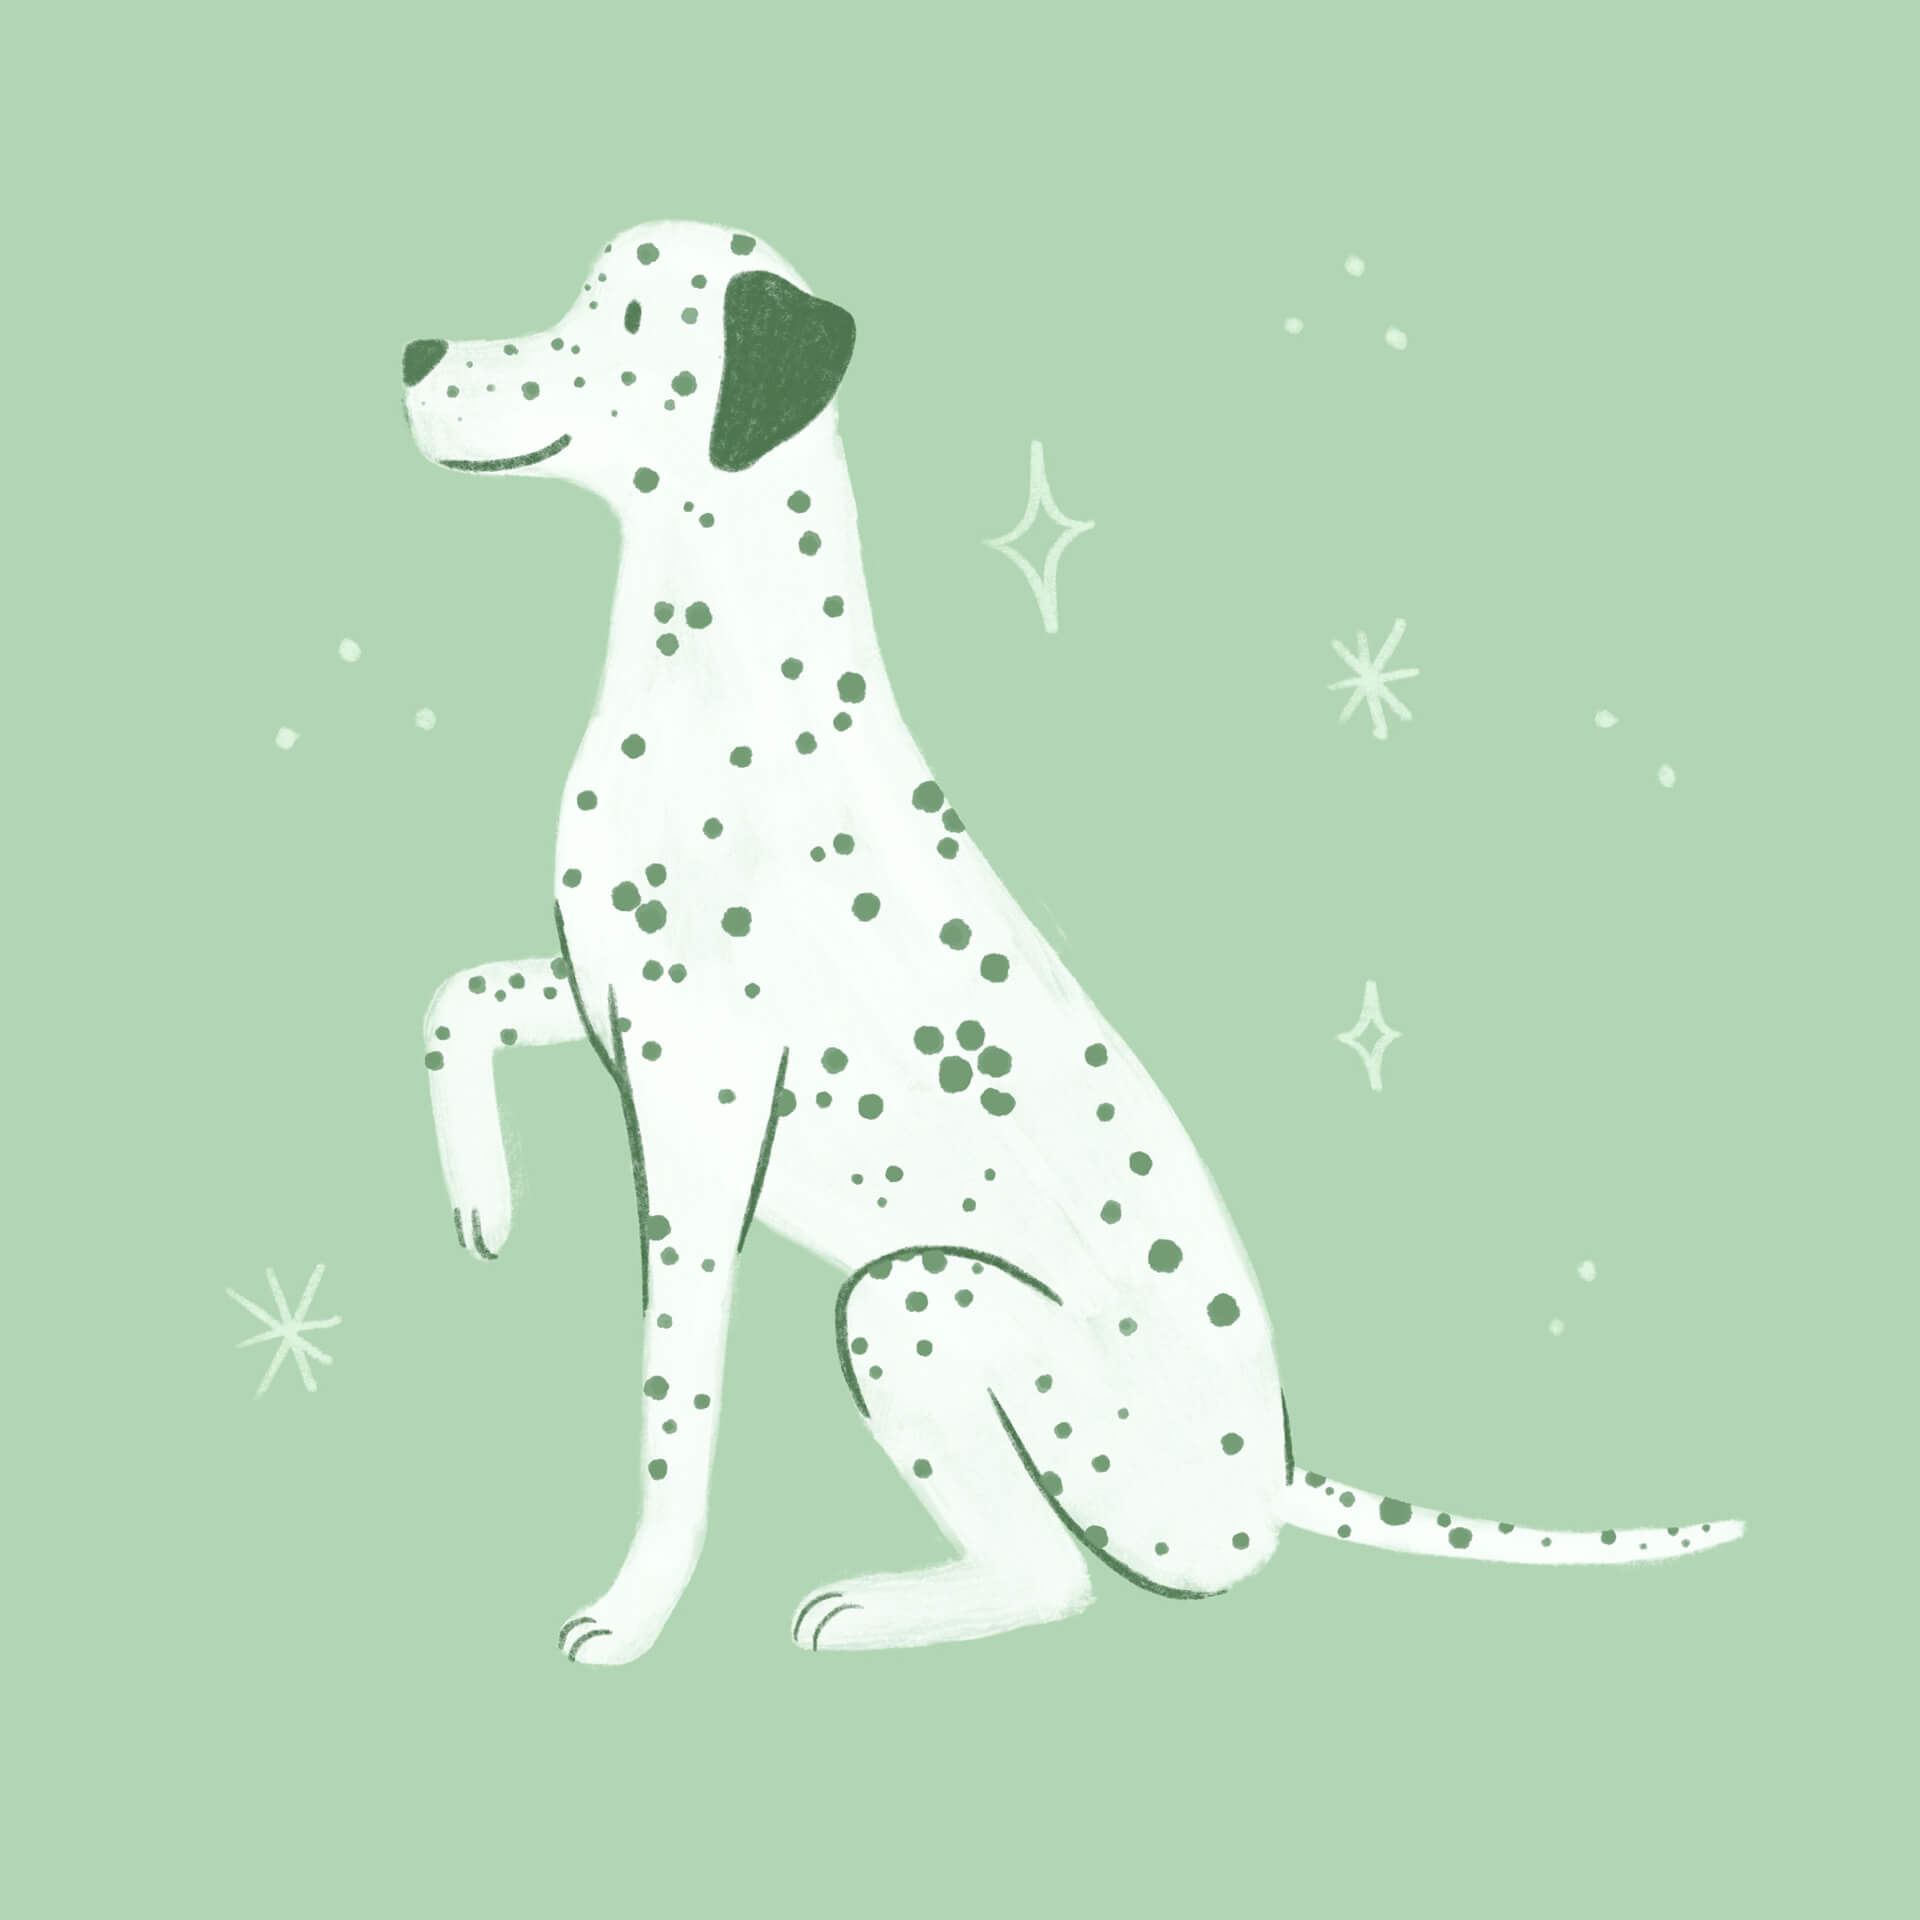 An illustration of a dalmatian sitting with its paw raised on a green background